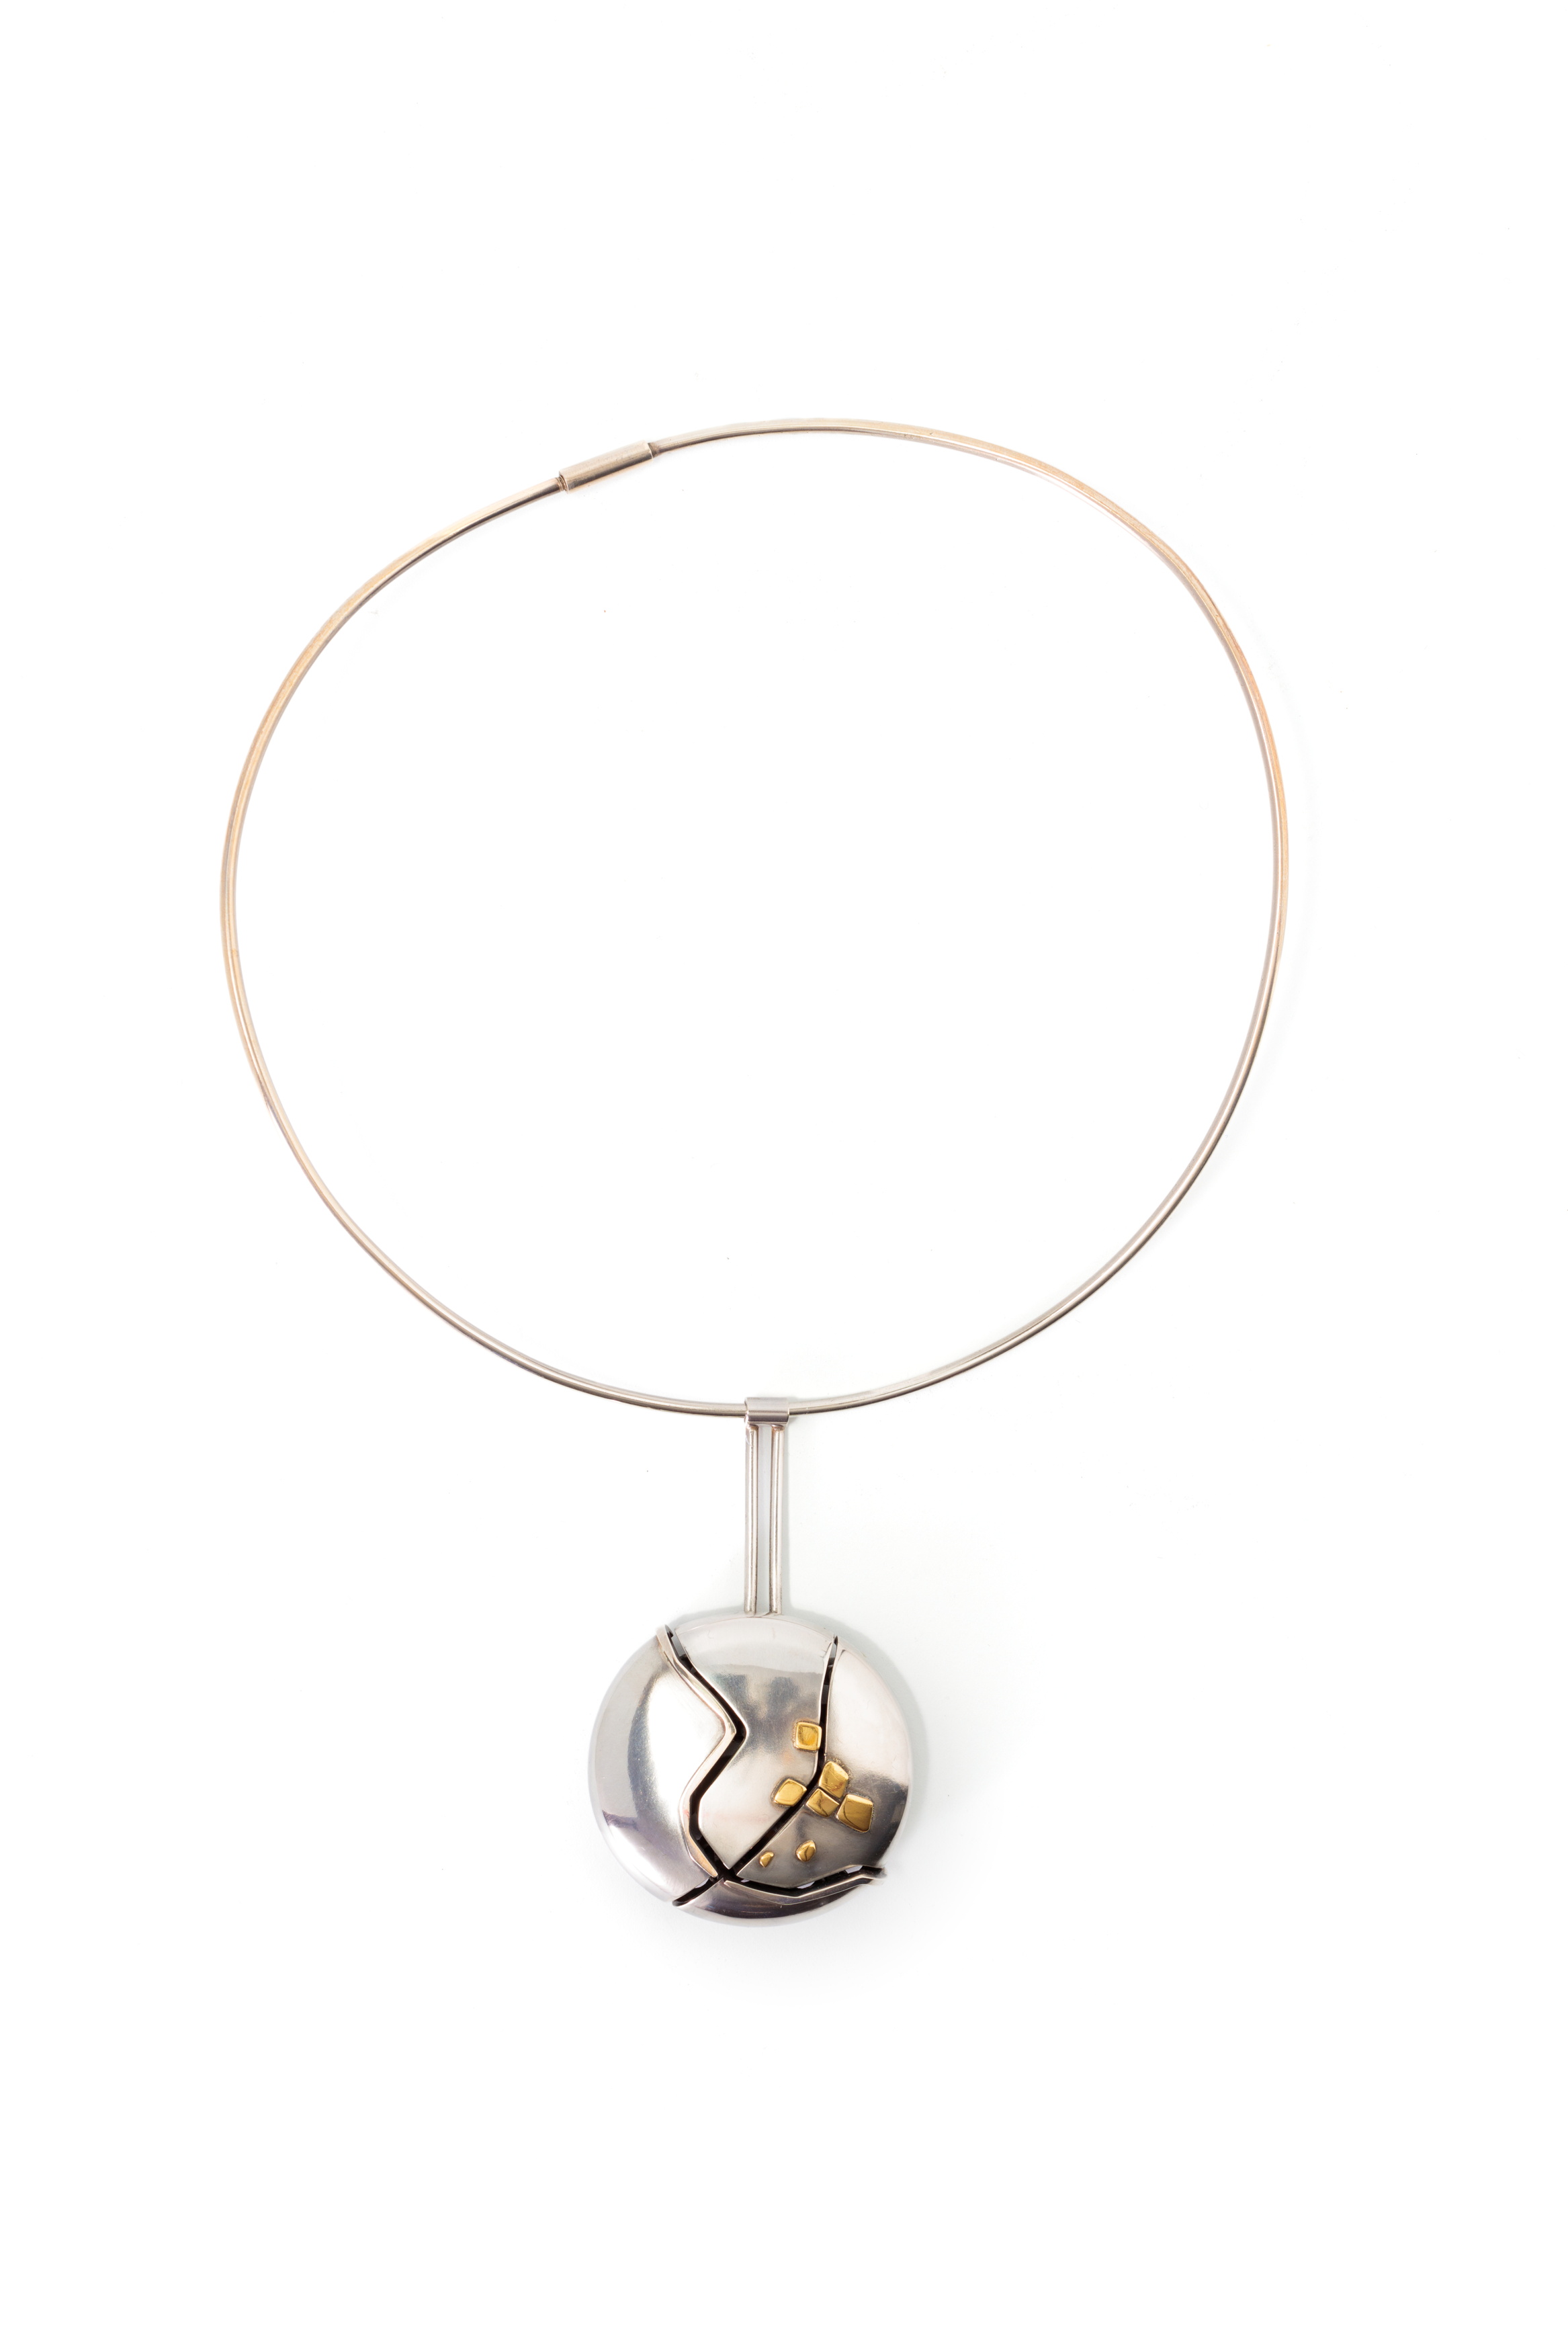 Neckring with pendant by Helge Larsen and Darani Lewers